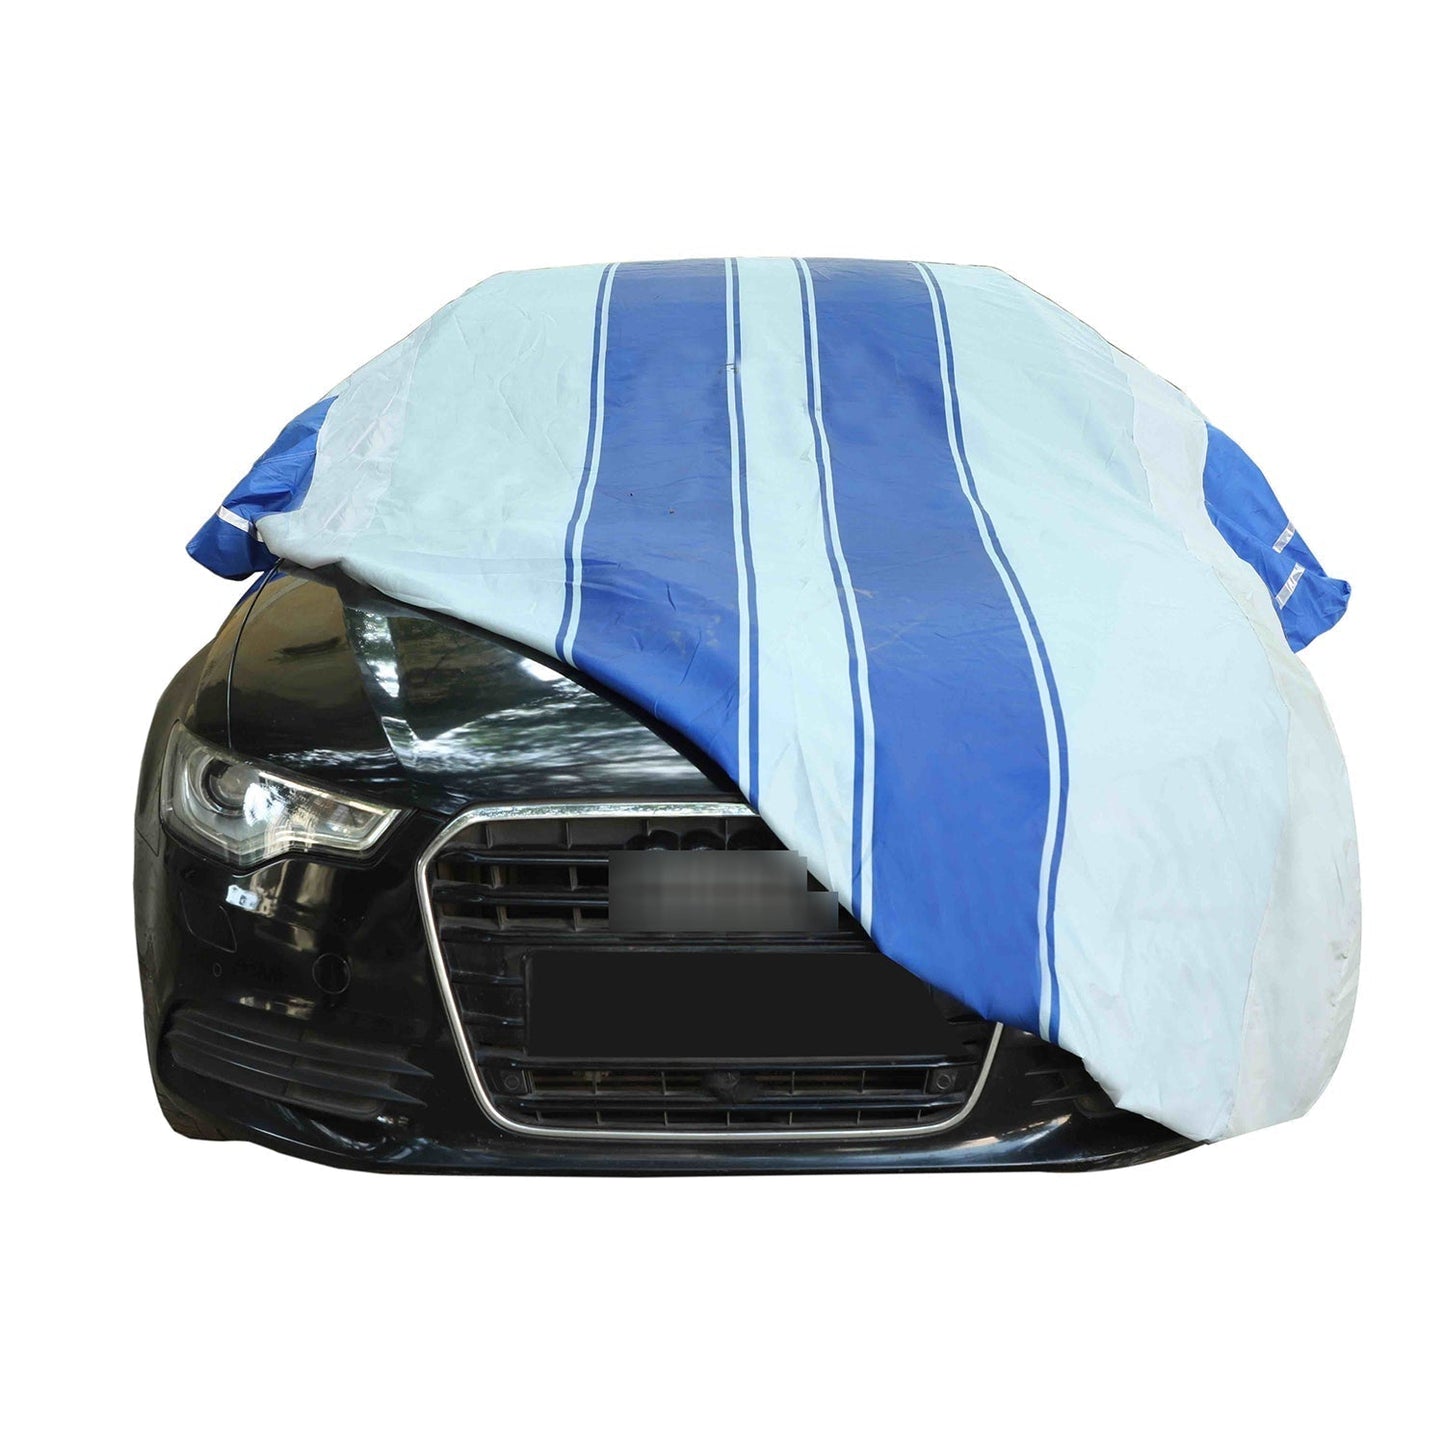 Oshotto 100% Blue dustproof and Water Resistant Car Body Cover with Mirror Pockets For Volkswagen Virtus